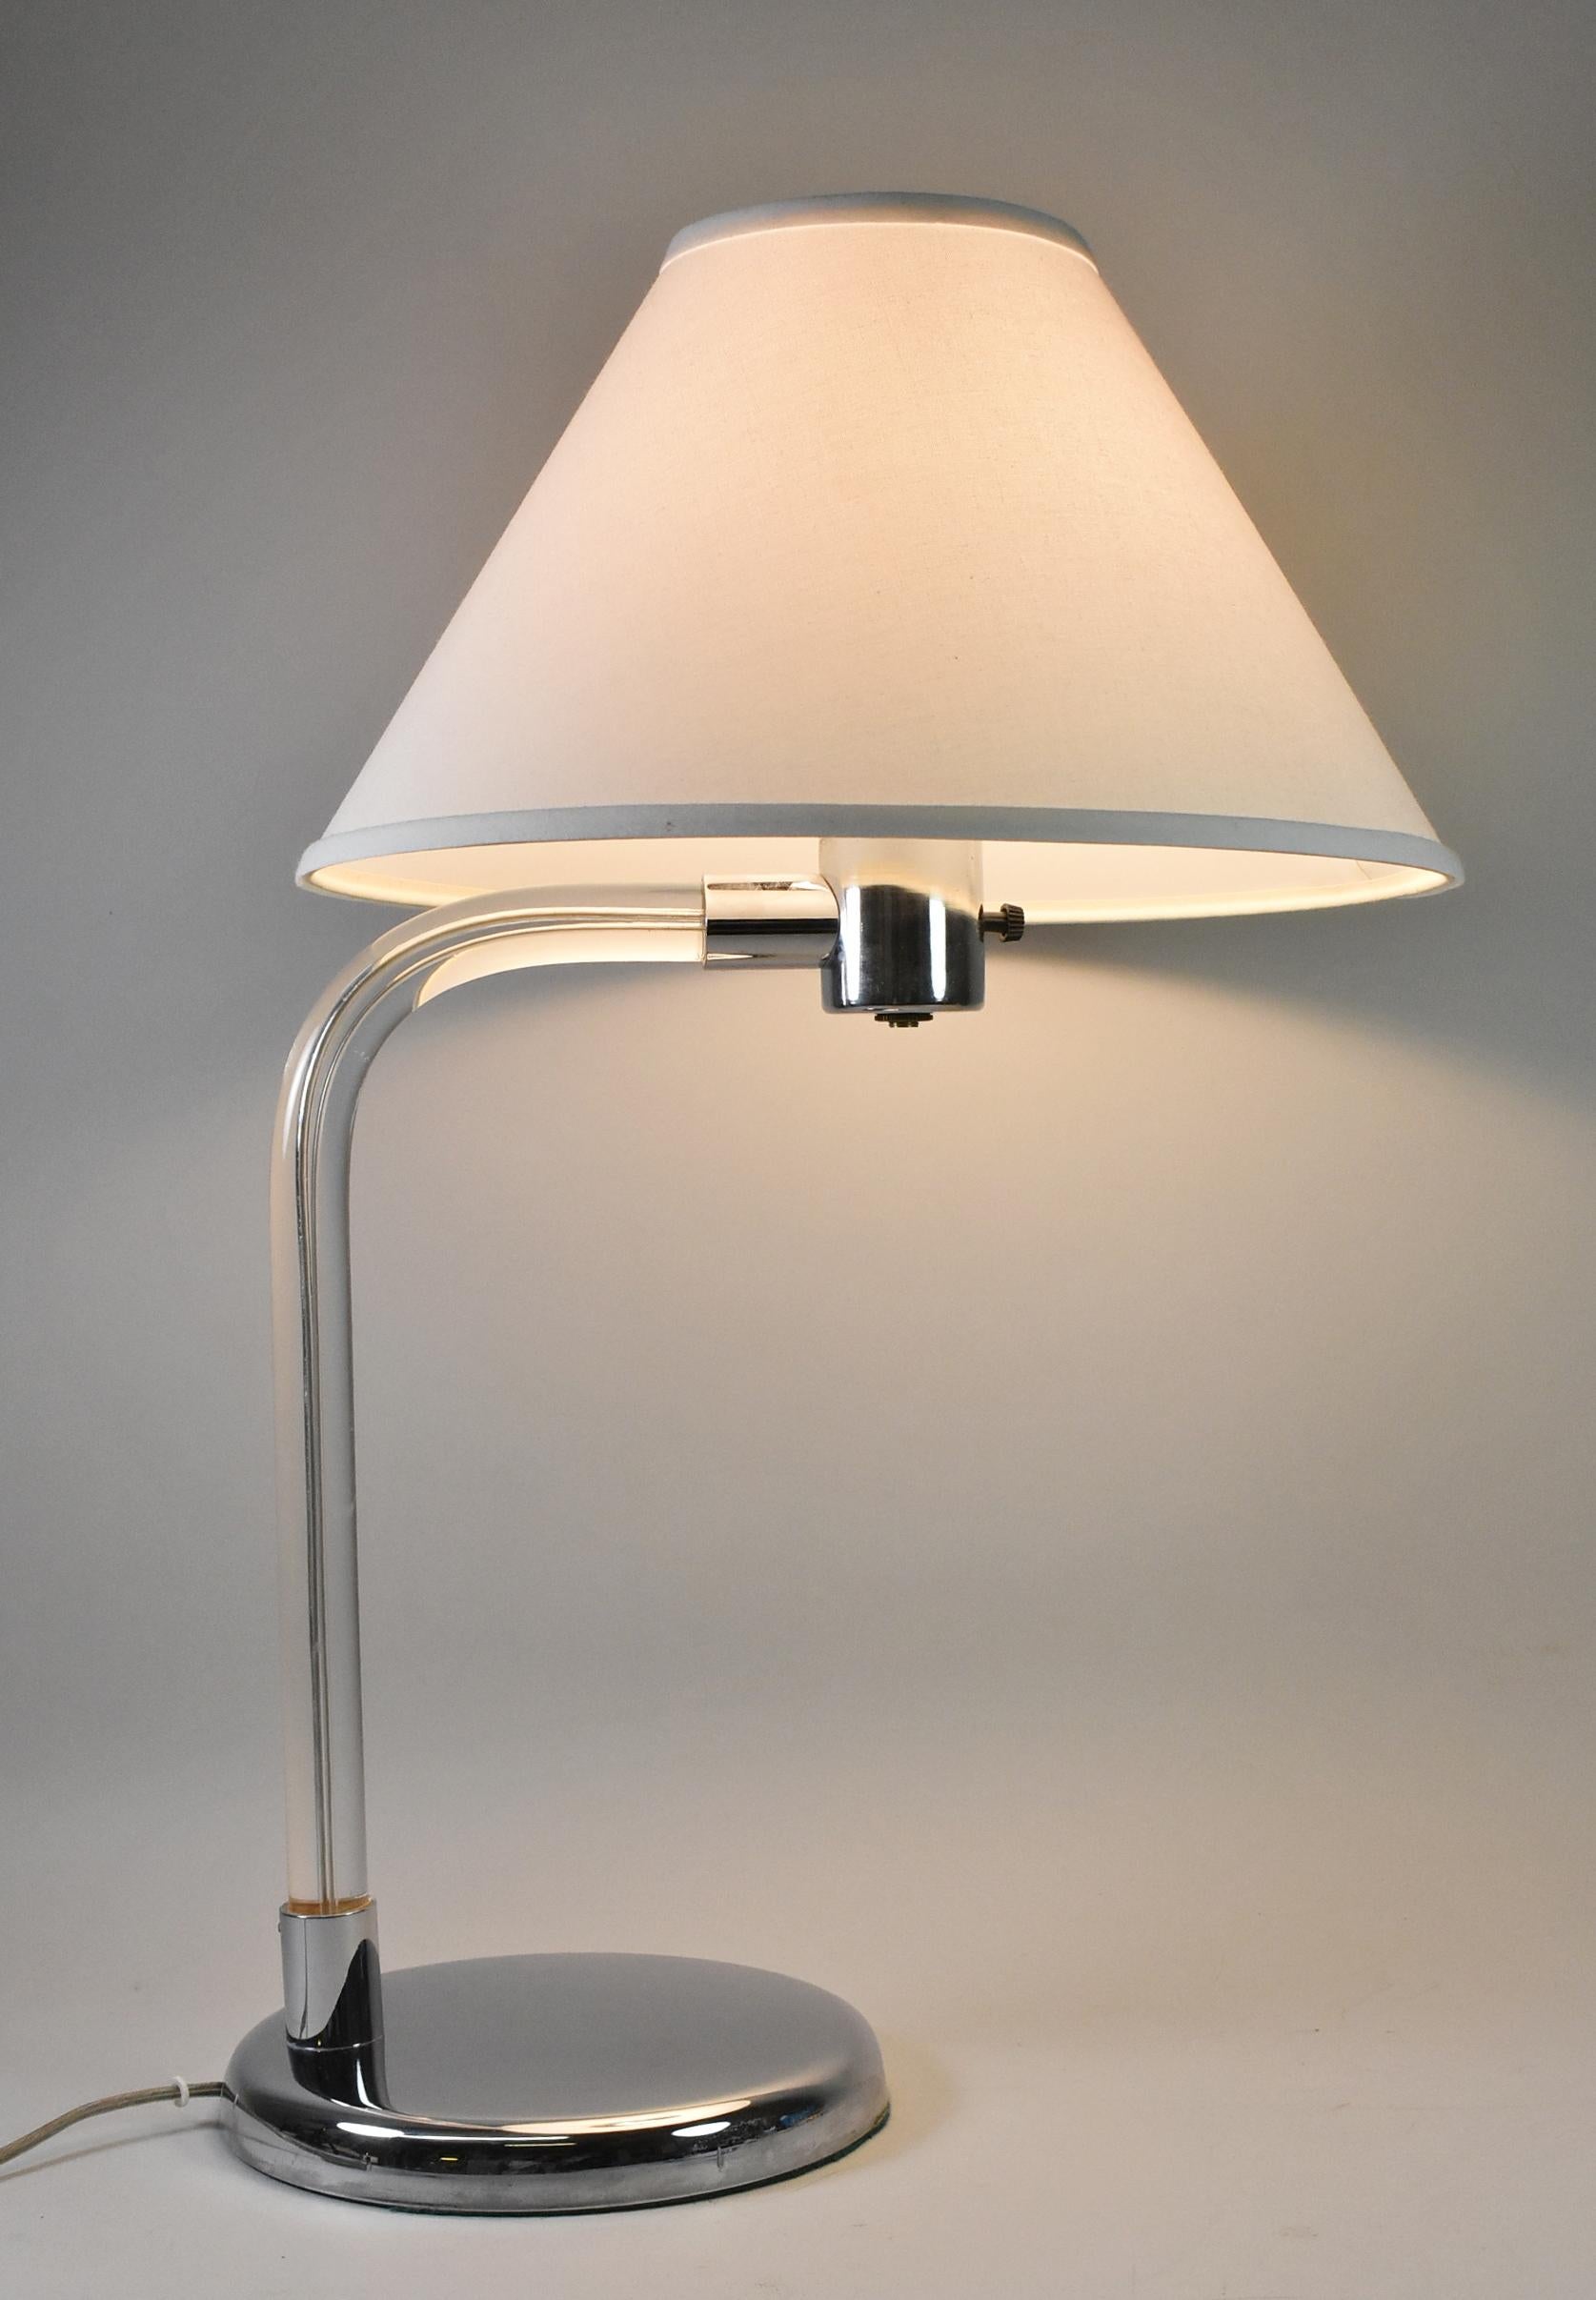 This beautiful mid century table lamp was designed by Peter Hamburger for Knoll. The gooseneck Lucite stem is capped with chrome hardware and base. The base is 8